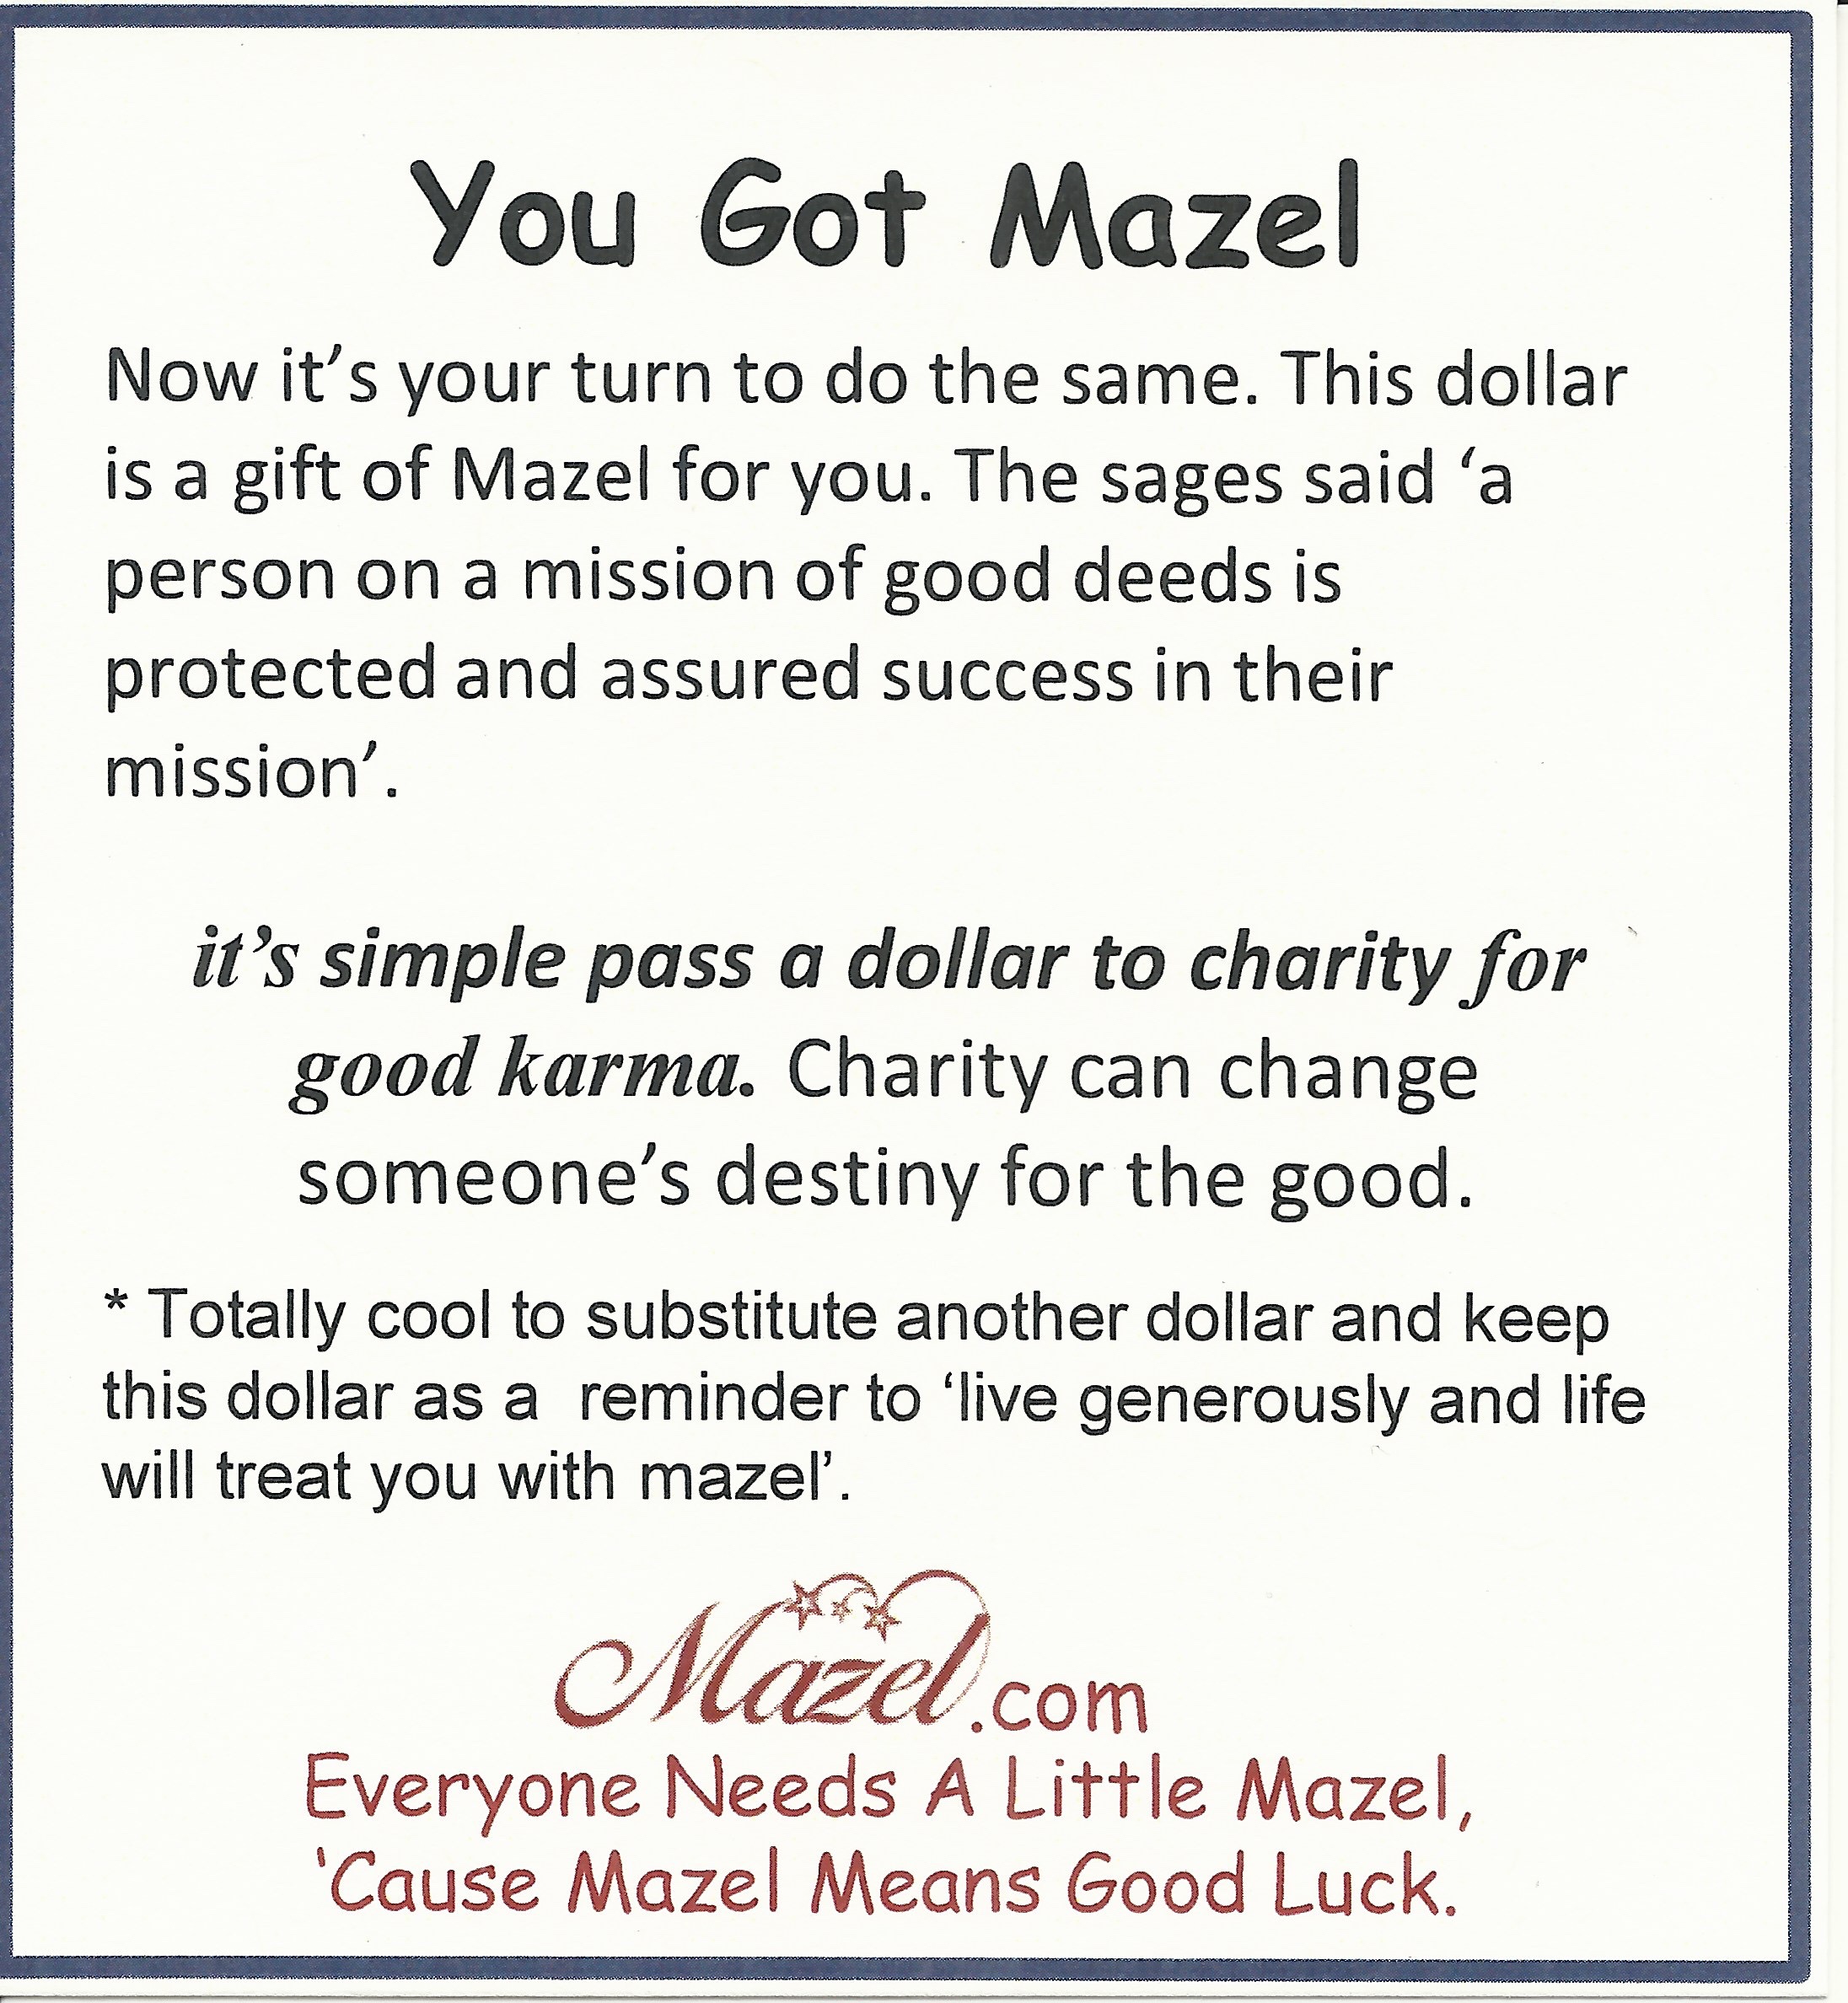 Cause Mazel Means Good Luck